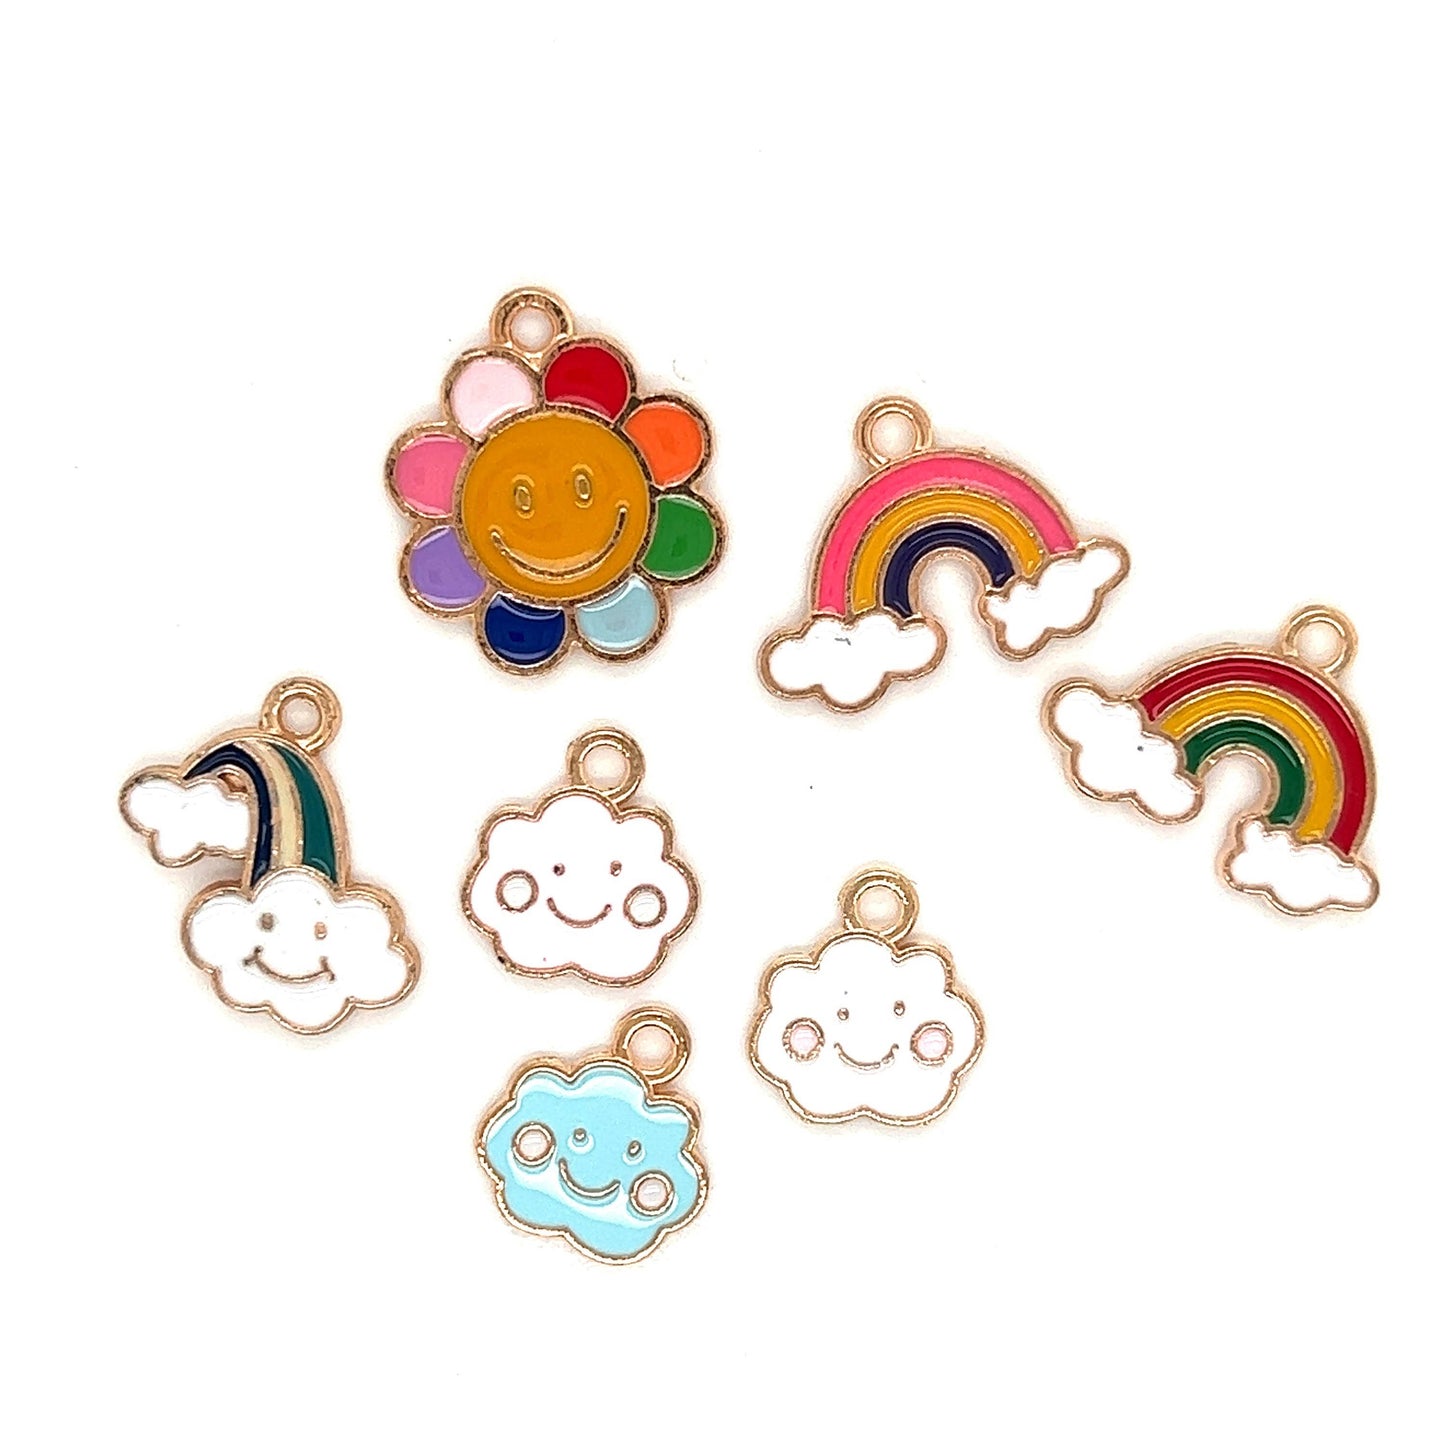 Pack of 10 Y2K Charms, Smiley Flower Charm, Rainbow Smiley Charm, Y2K Smiley Pendant For Necklace, DIY Charms For Bracelet, Bulk Wholesale Charm